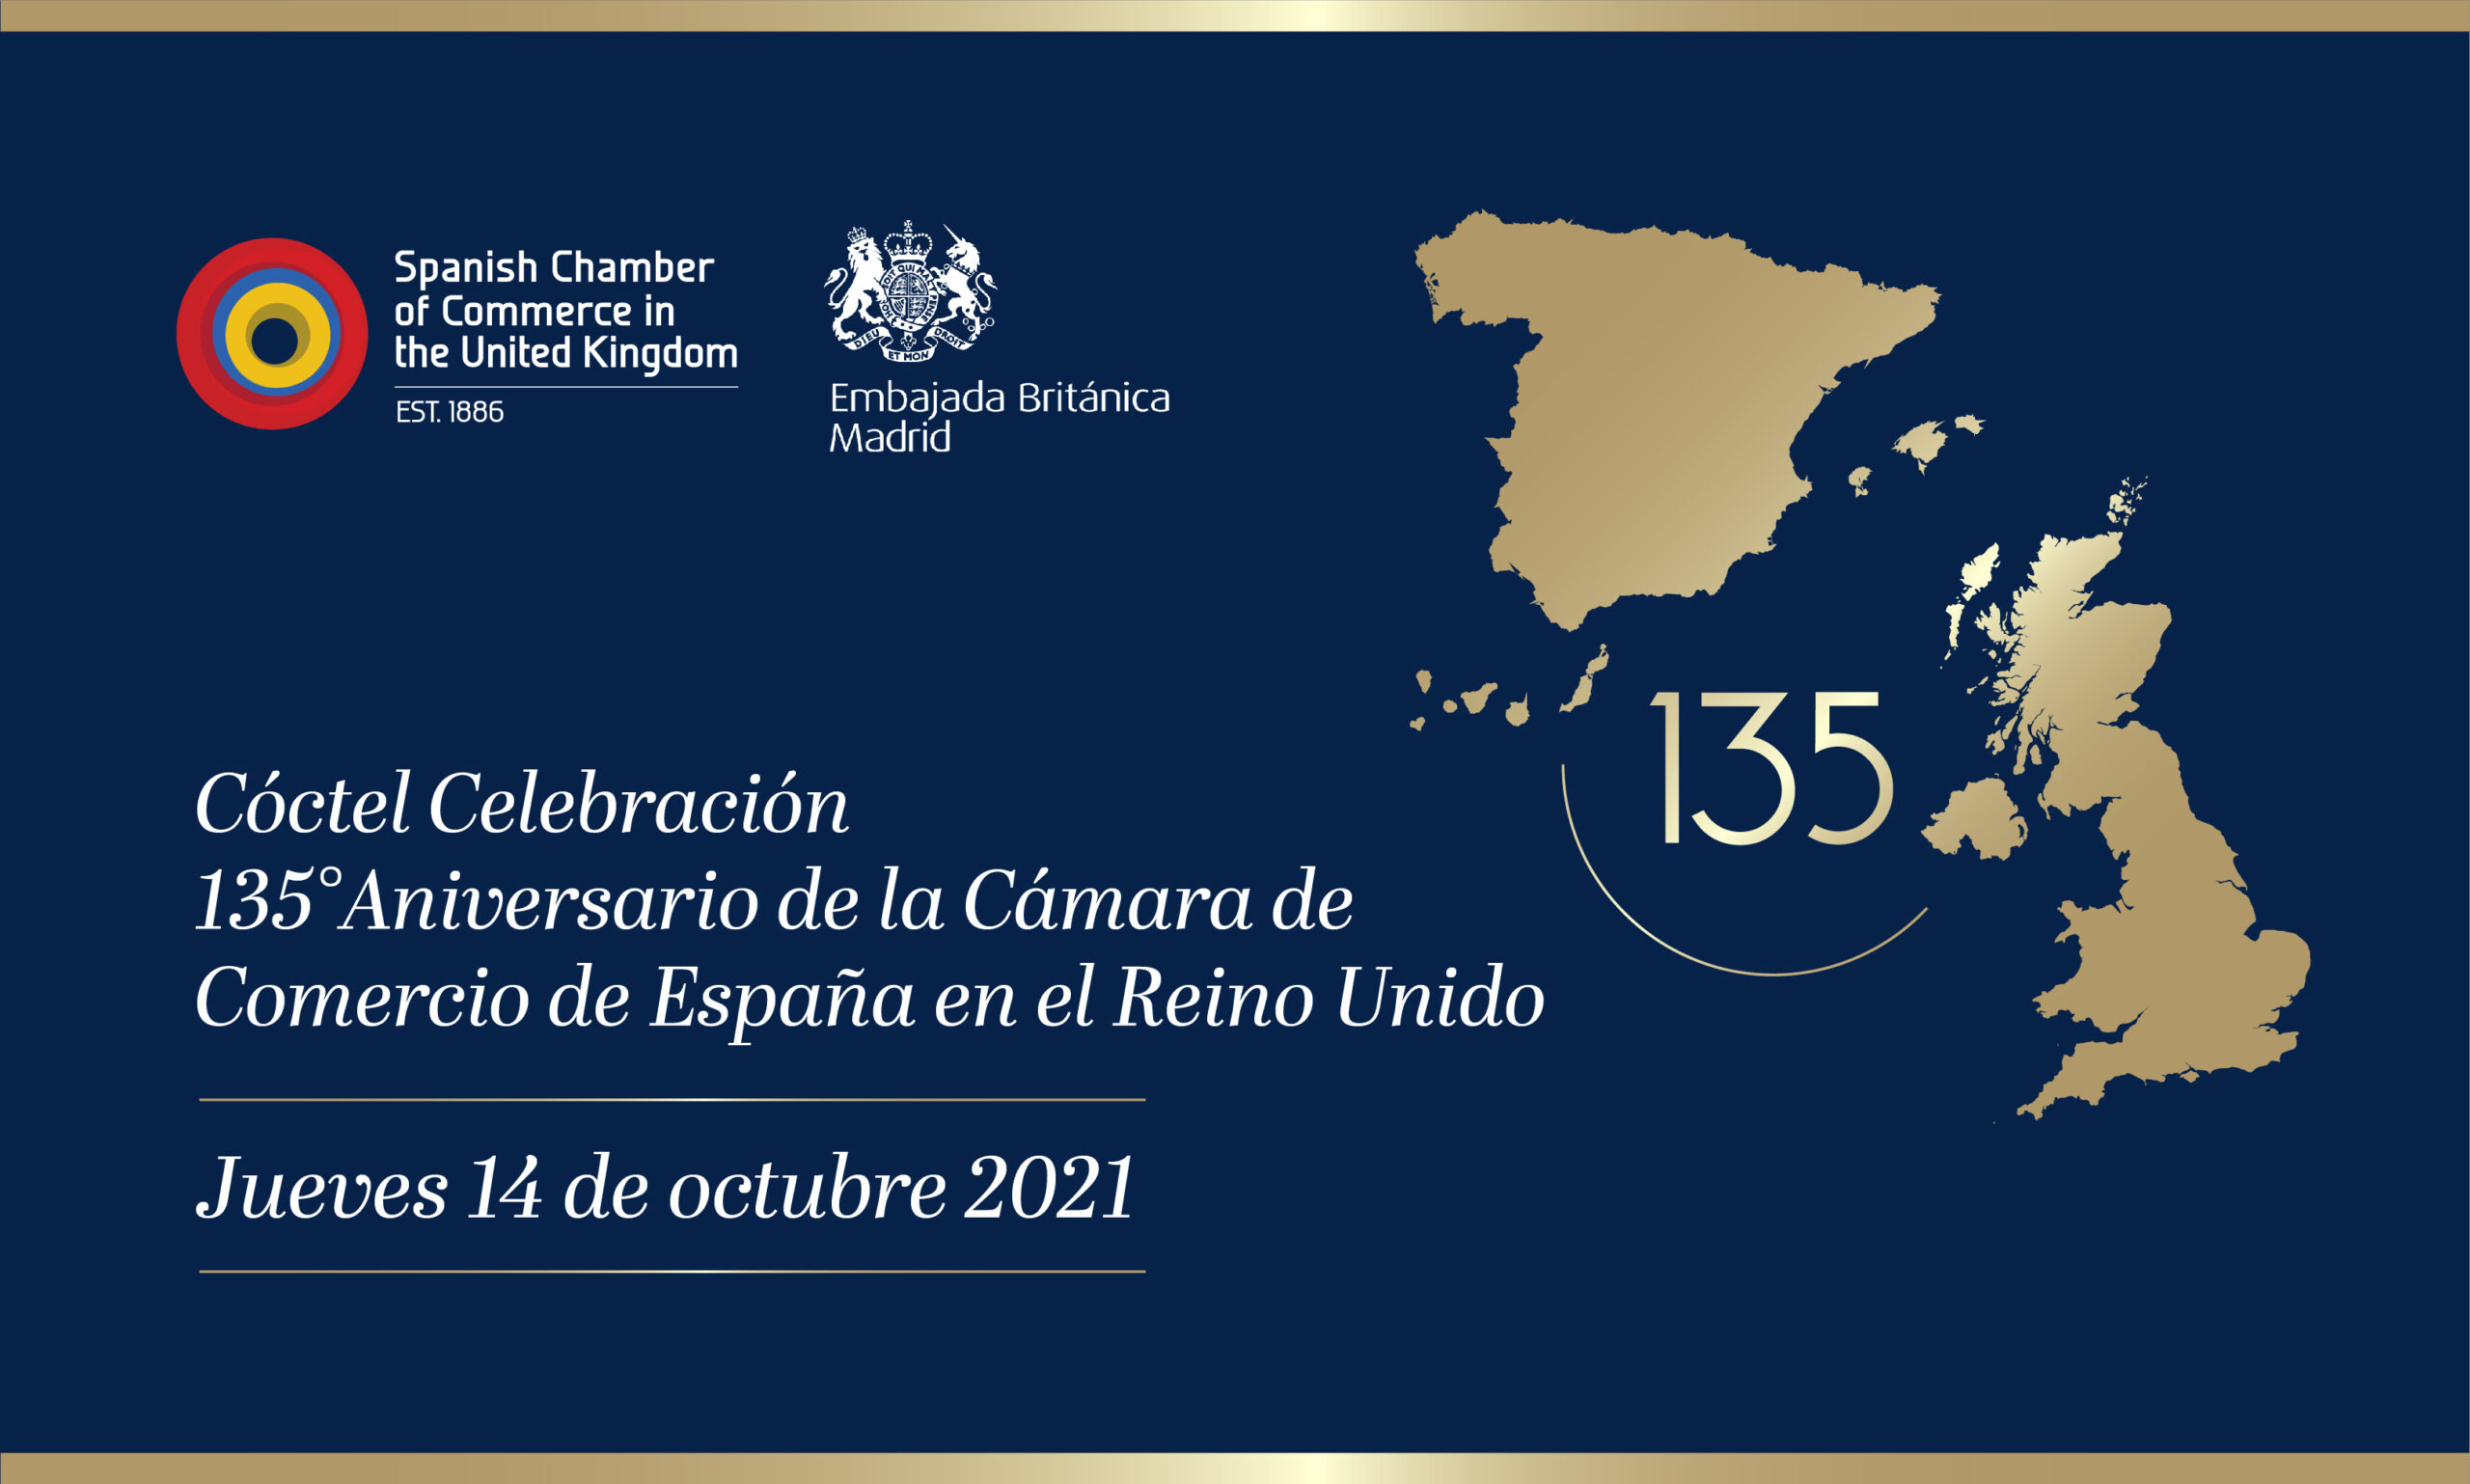 Reception of the 135th Anniversary of the Spanish Chamber of Commerce in the UK